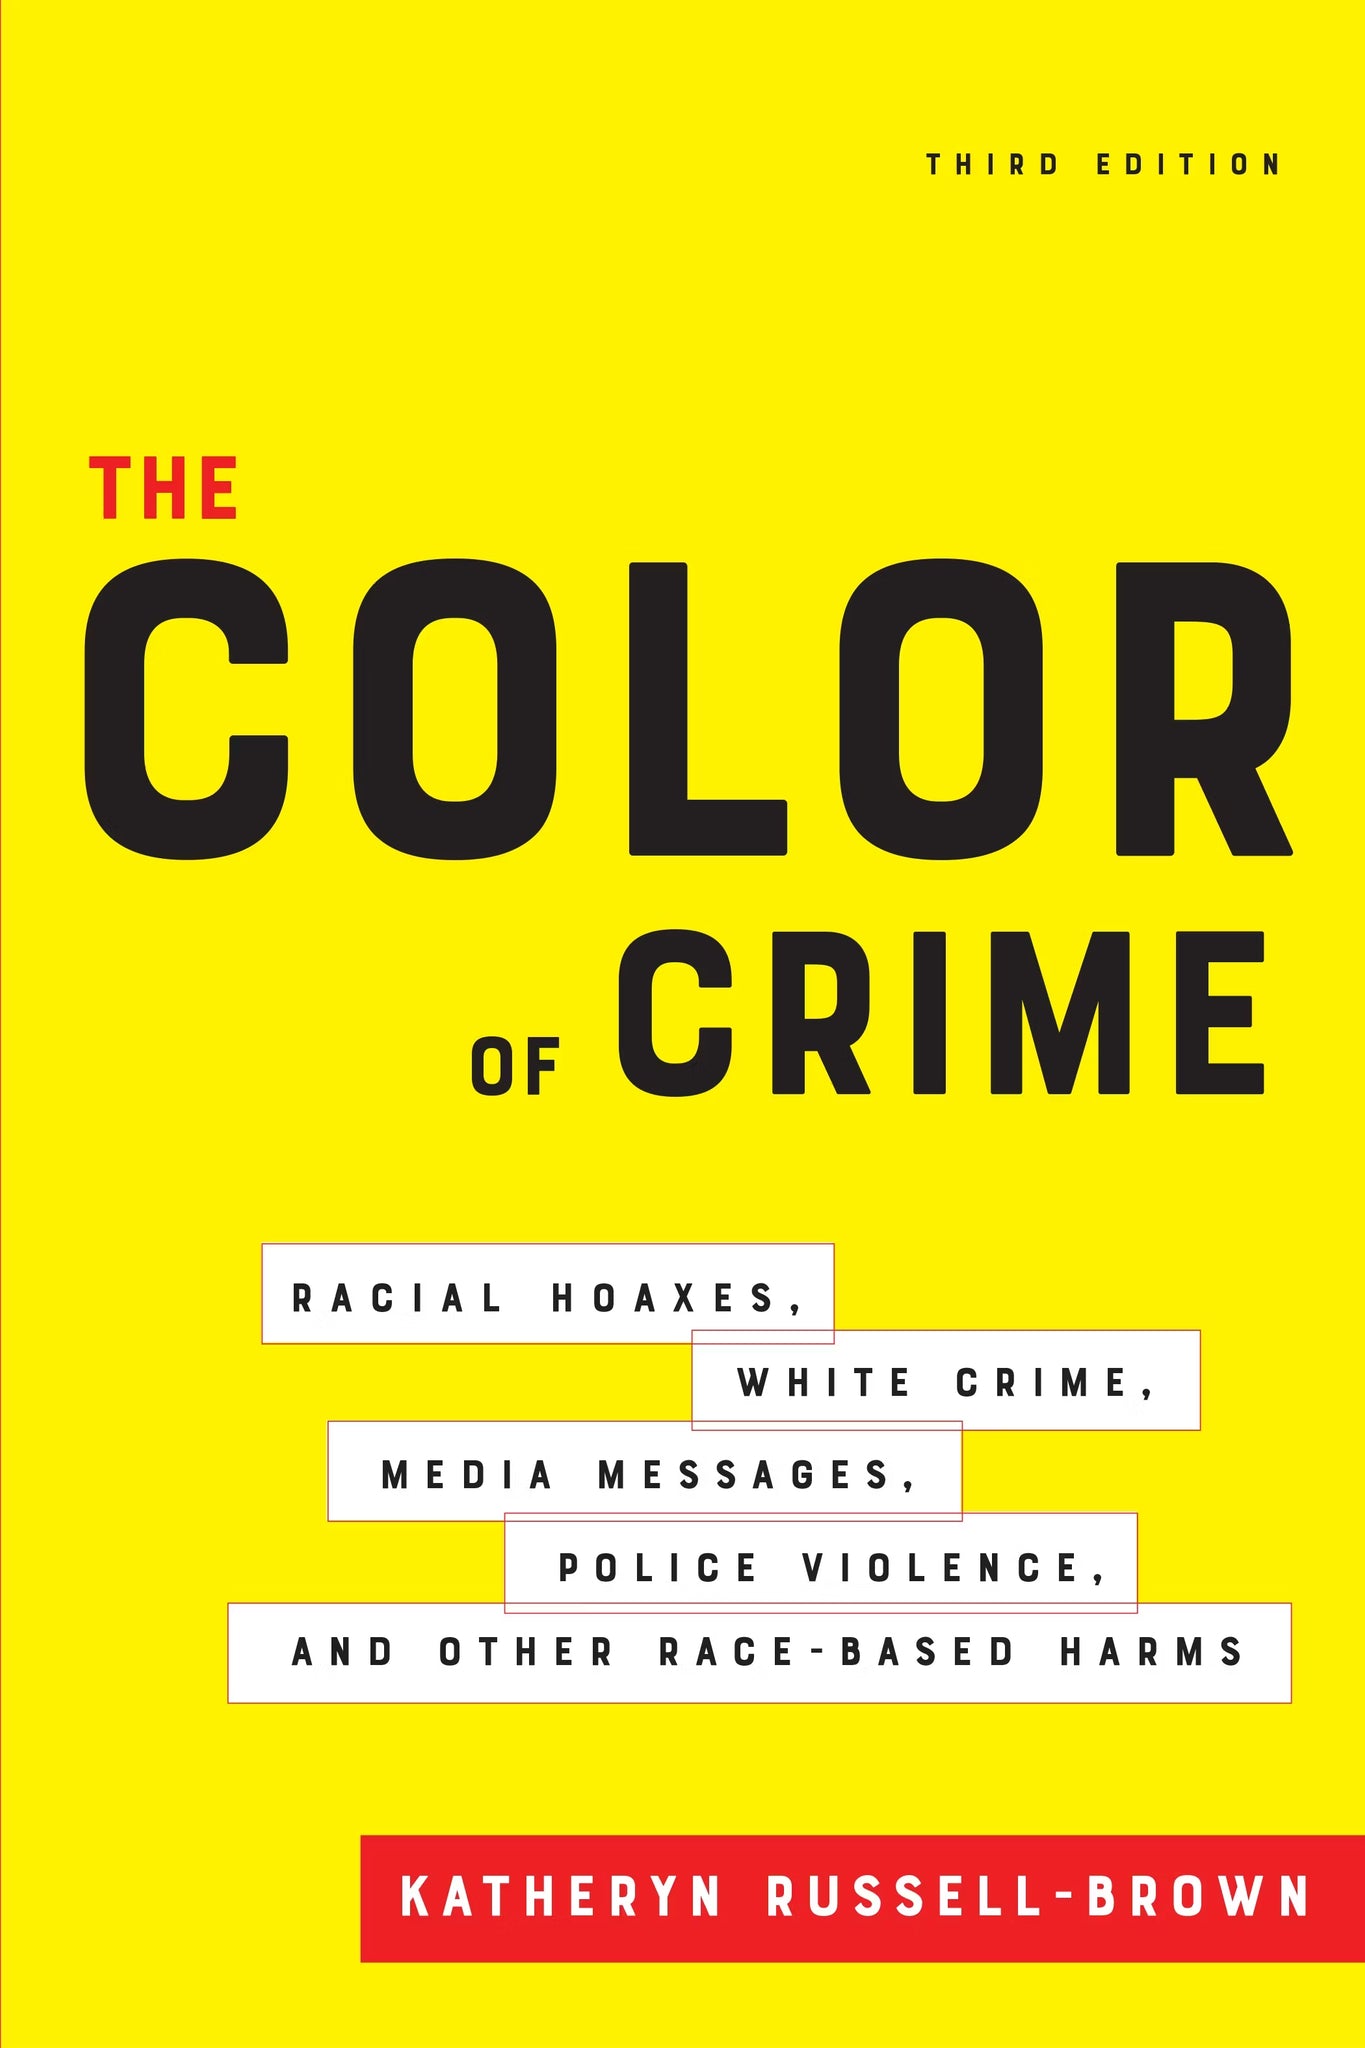 The Color of Crime, Third Edition: Racial Hoaxes, White Crime, Media Messages, Police Violence, and Other Race-Based Harms (Paperback)